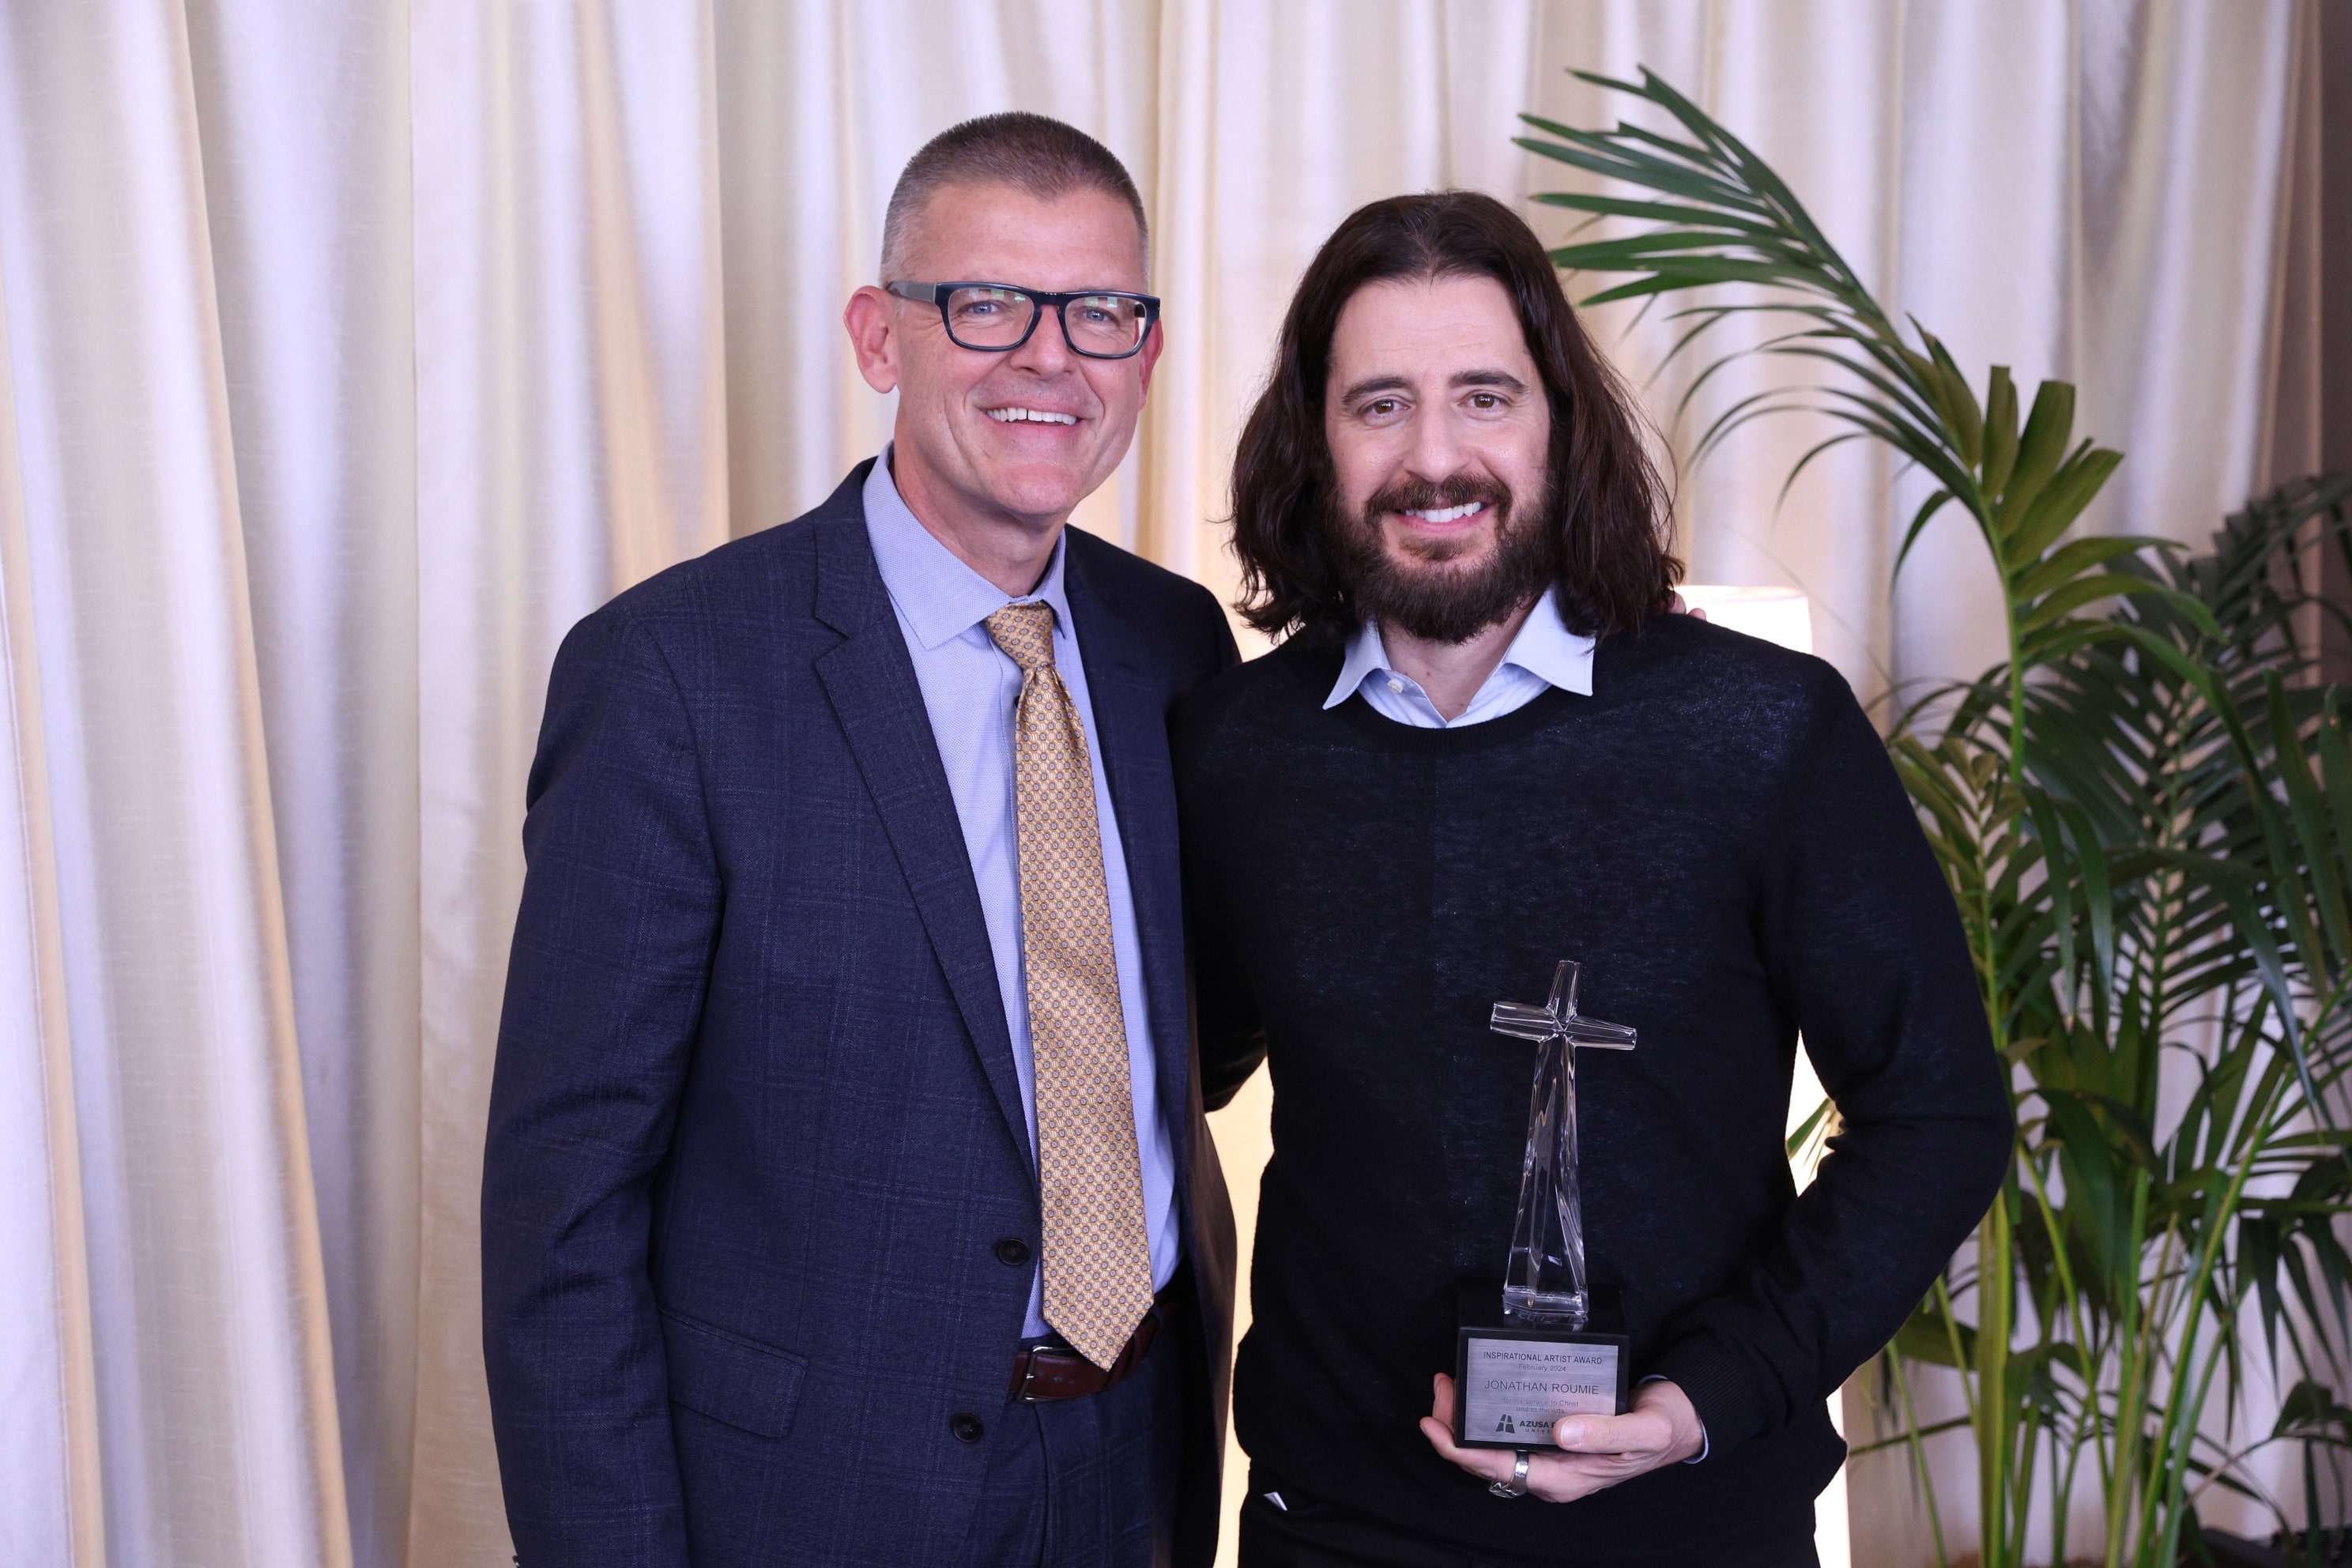 president morris with jonathan roumie holding an award